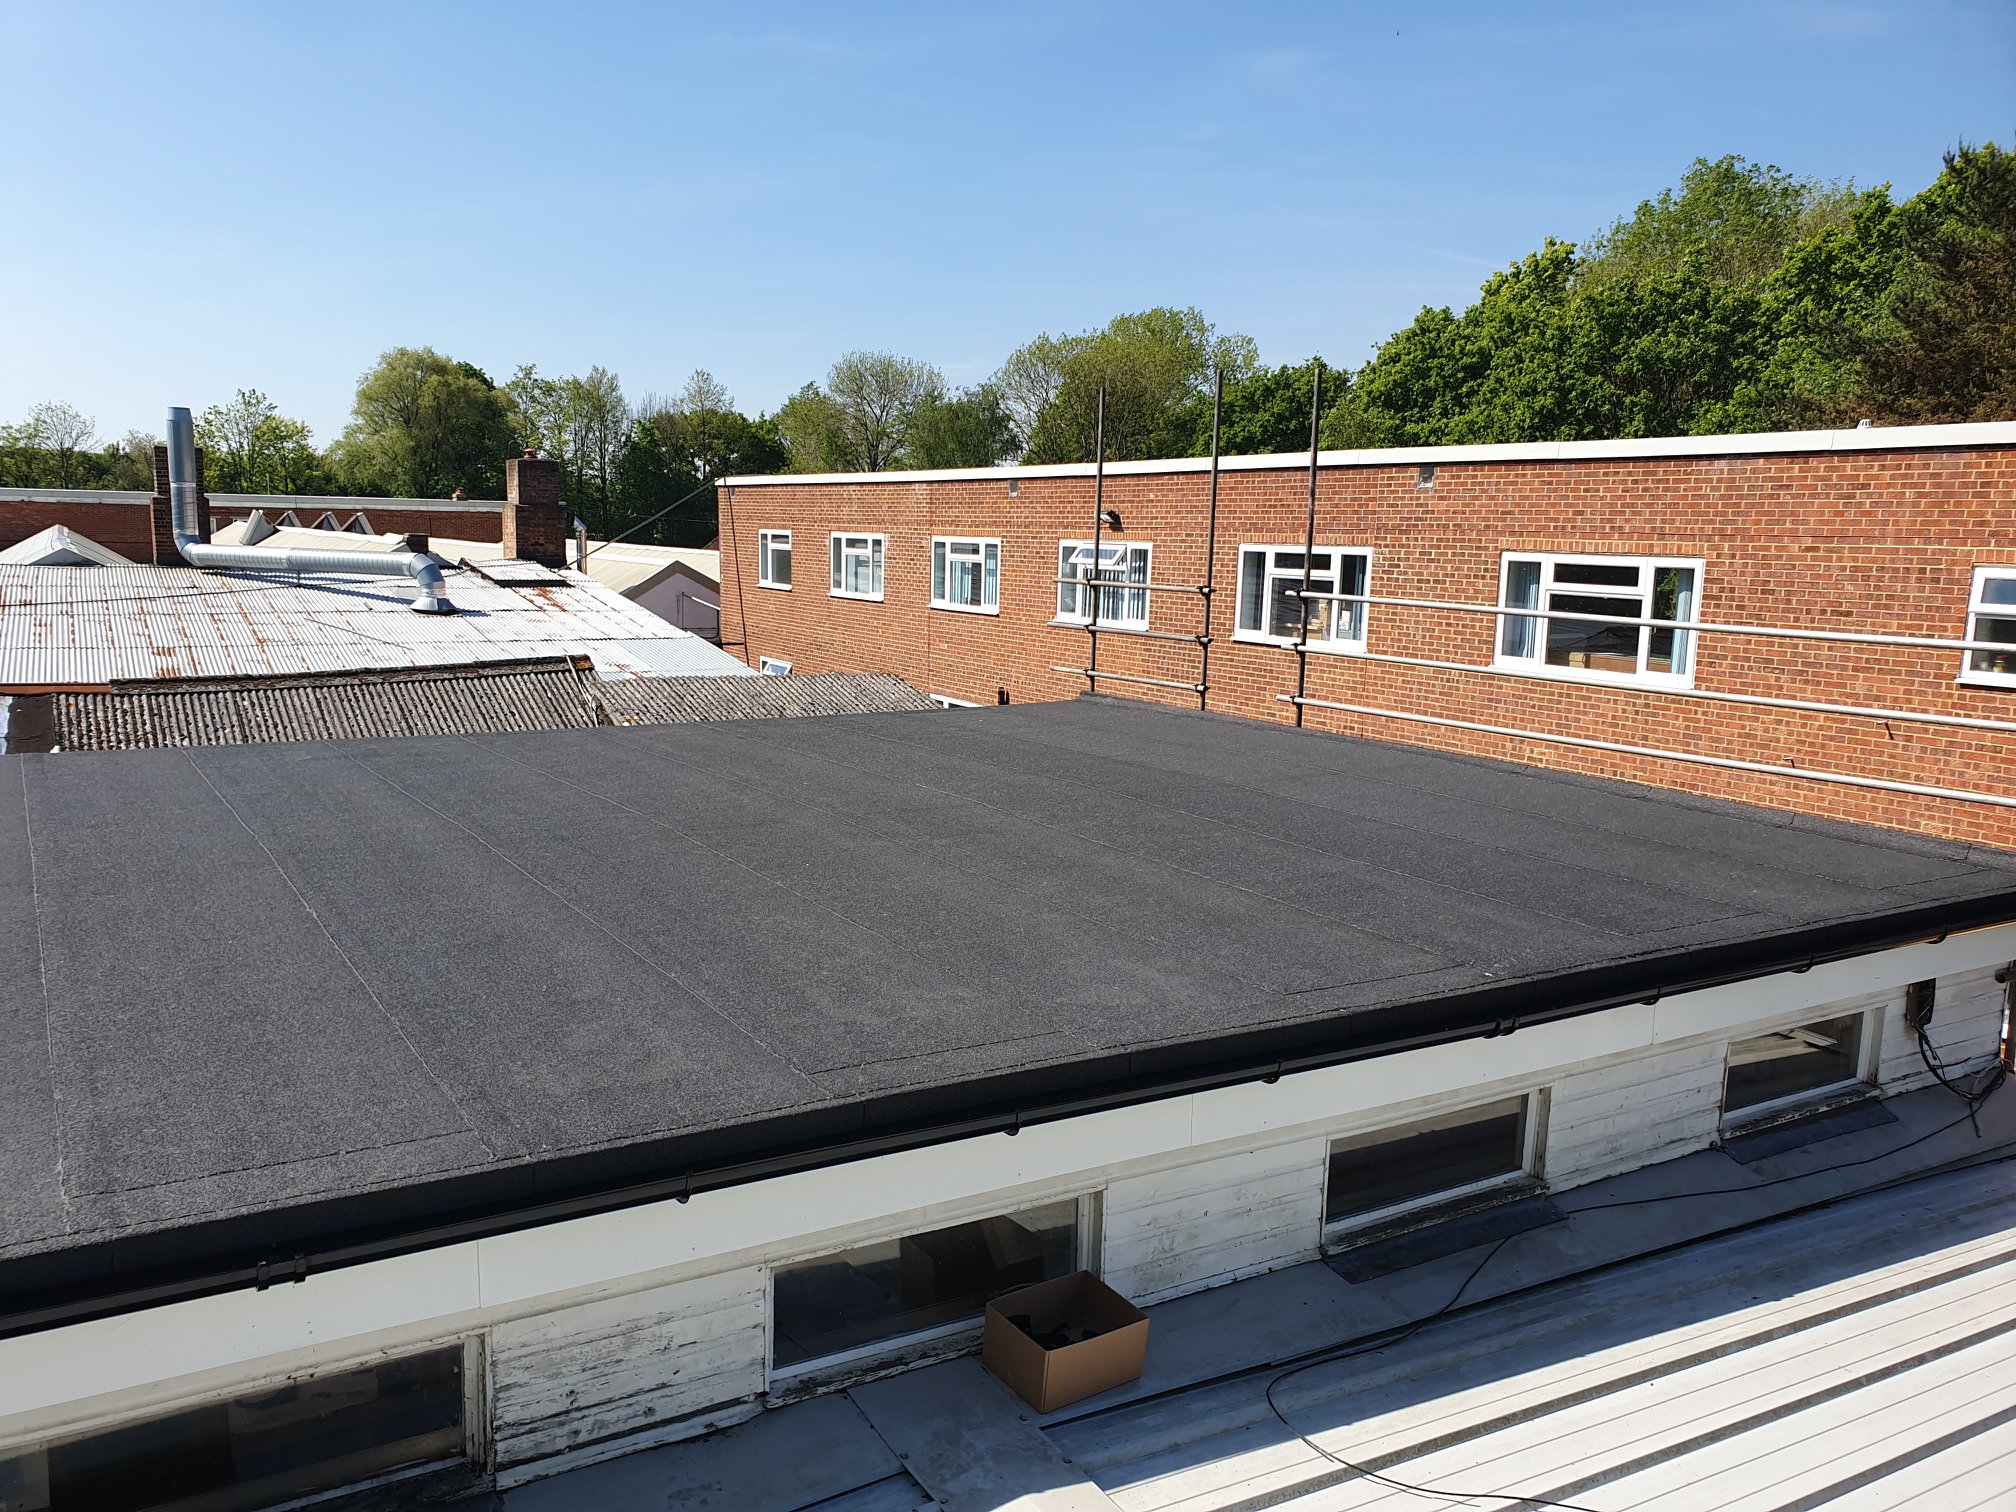 Flat roof felting over a workshop in Crawley, West Sussex